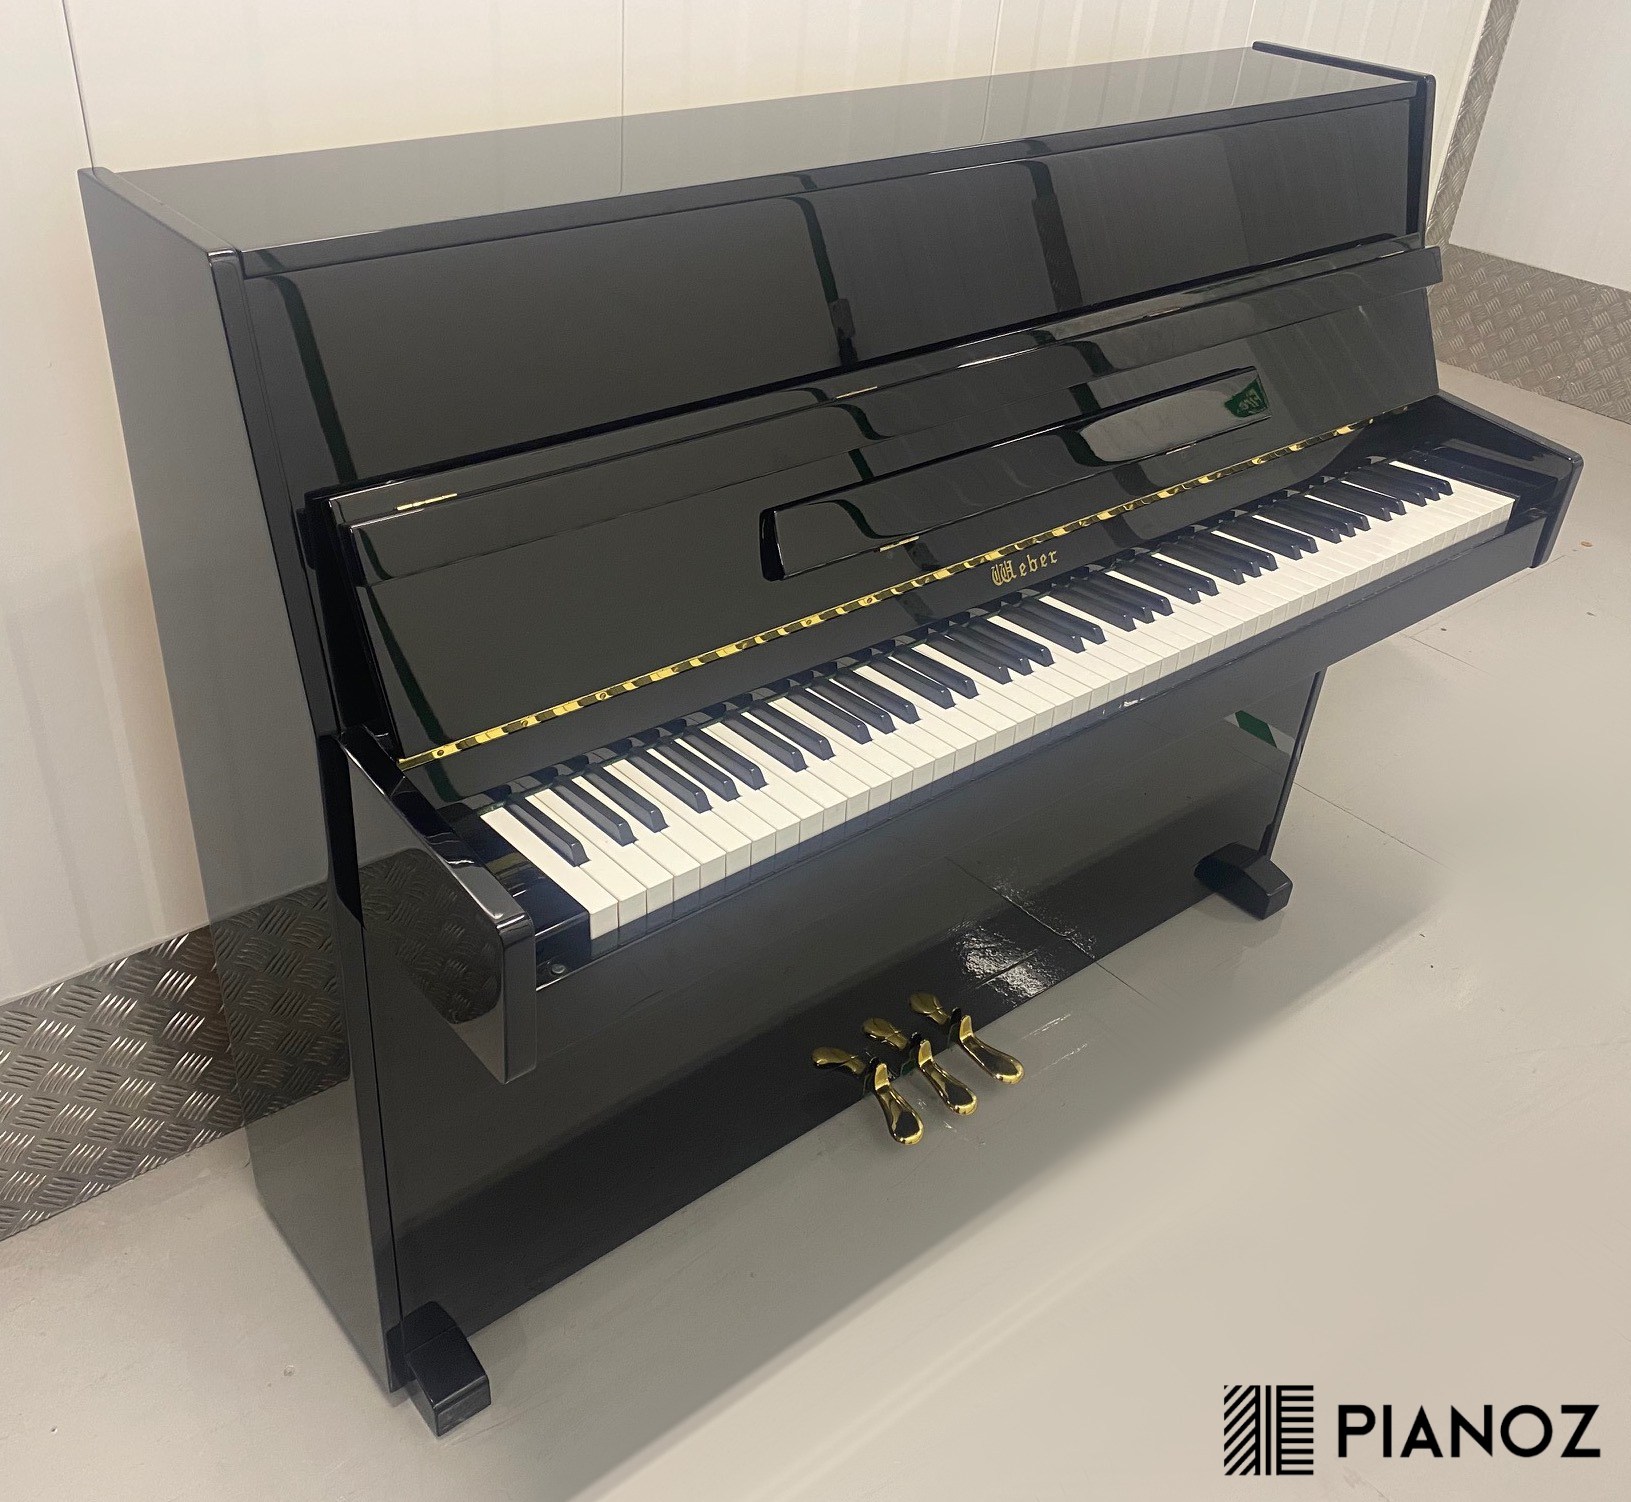 Weber Compact Black Upright Piano piano for sale in UK